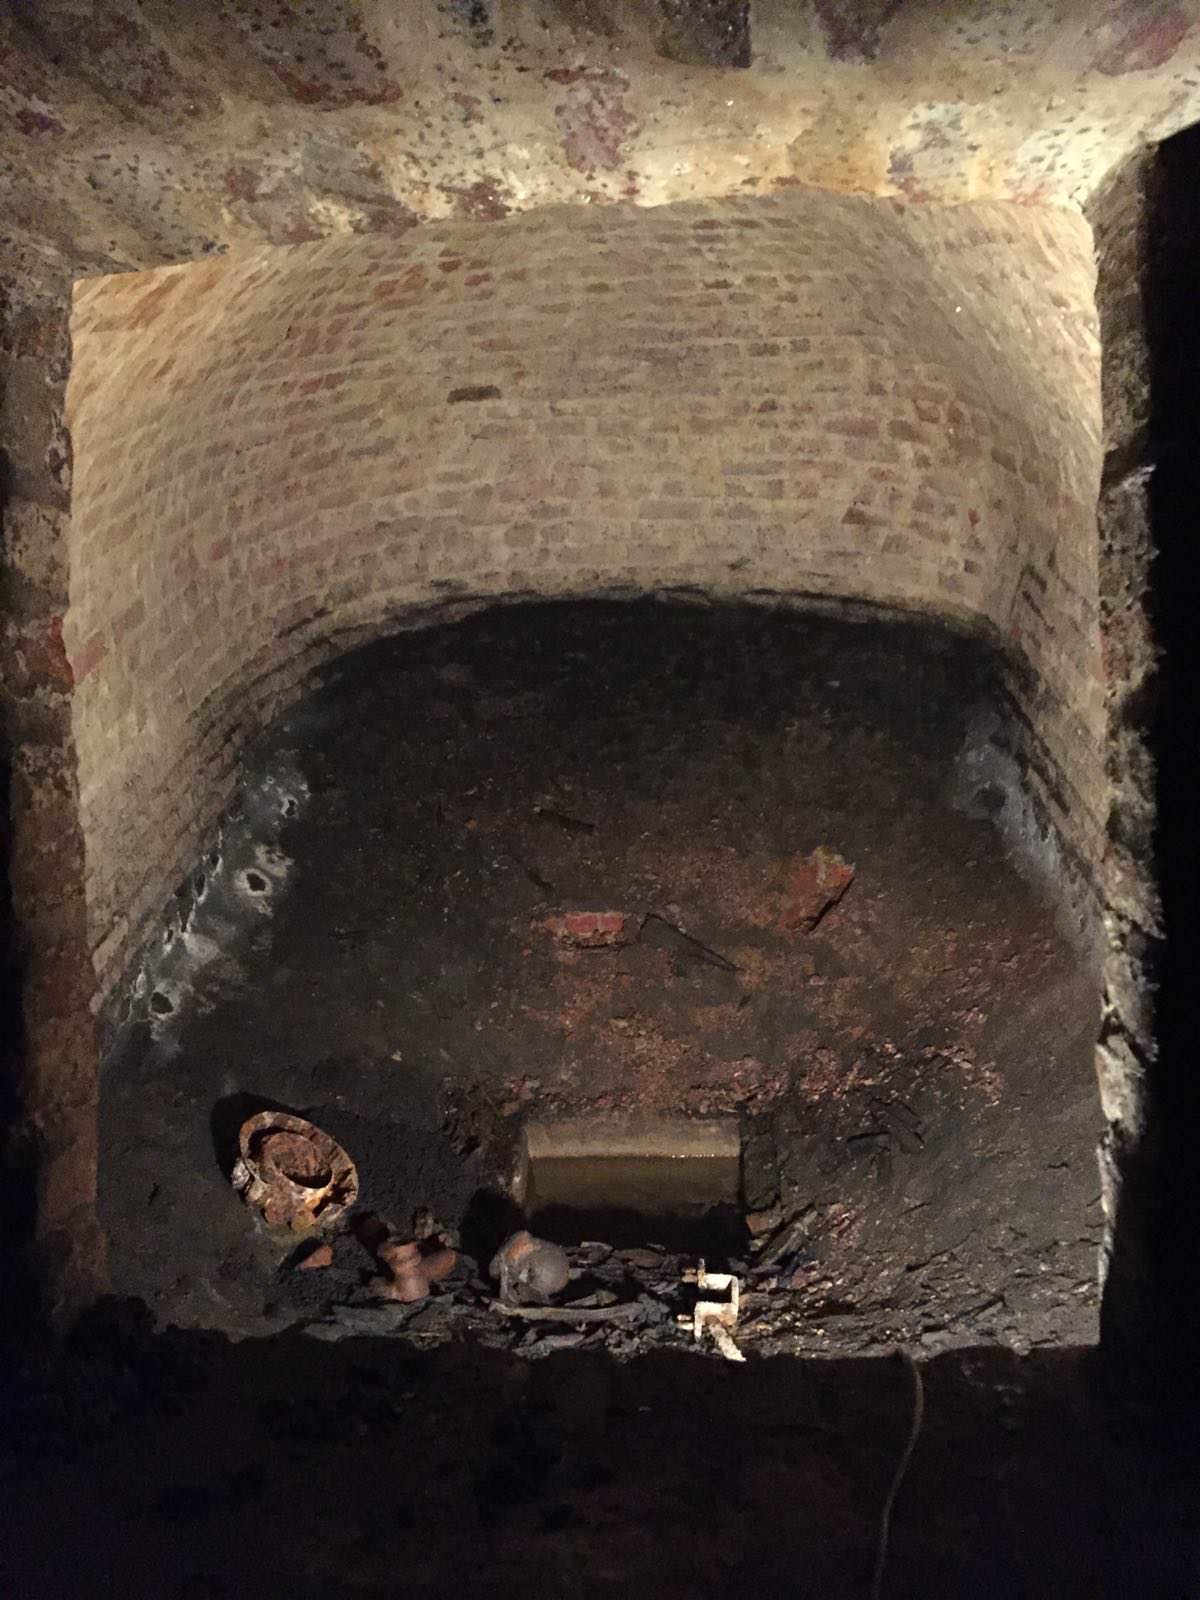 "At the other side of the coal chute there is a larger vaulted room. The room is accessible only through a wide rectangular opening in the wall. The bottom of the opening came up to my hips and i'm 194cm (6'4 in freedom units). Very nice masonry. Vaulted basically everywhere, there is no horizontal floor. This could be a sort of water reserve/water pit from the time of the brewery in the 17th century. You can see tools (?) laying around and a square hole in the middle with water in it. What is the purpose? I don't know."